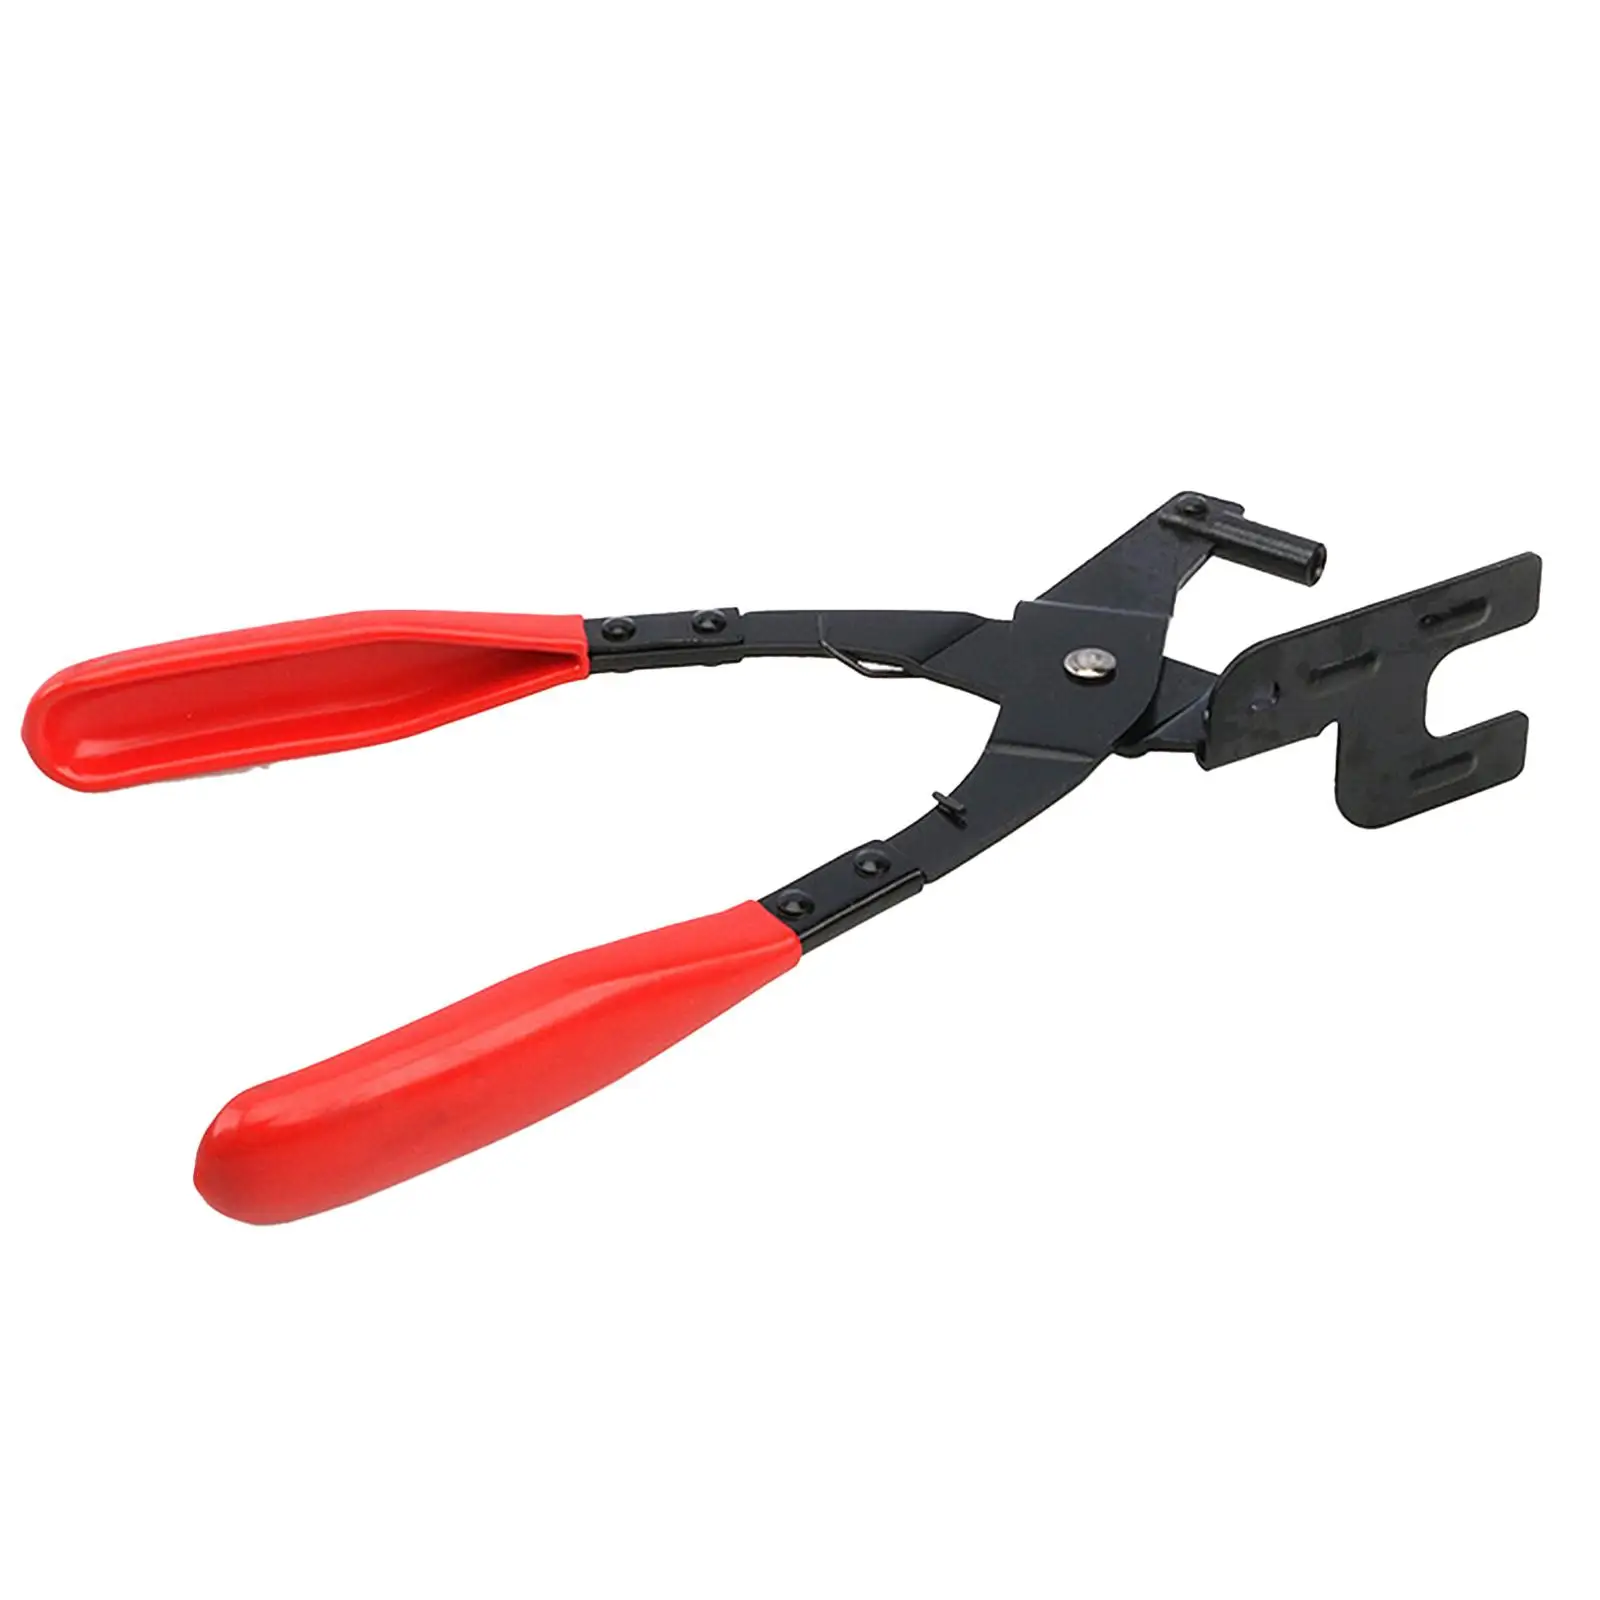 Car Exhaust Hanger Removal Pliers Separates Rubber Supports from Exhaust Hanger Brackets Rubber Exhaust Hanger Removal Tool Red